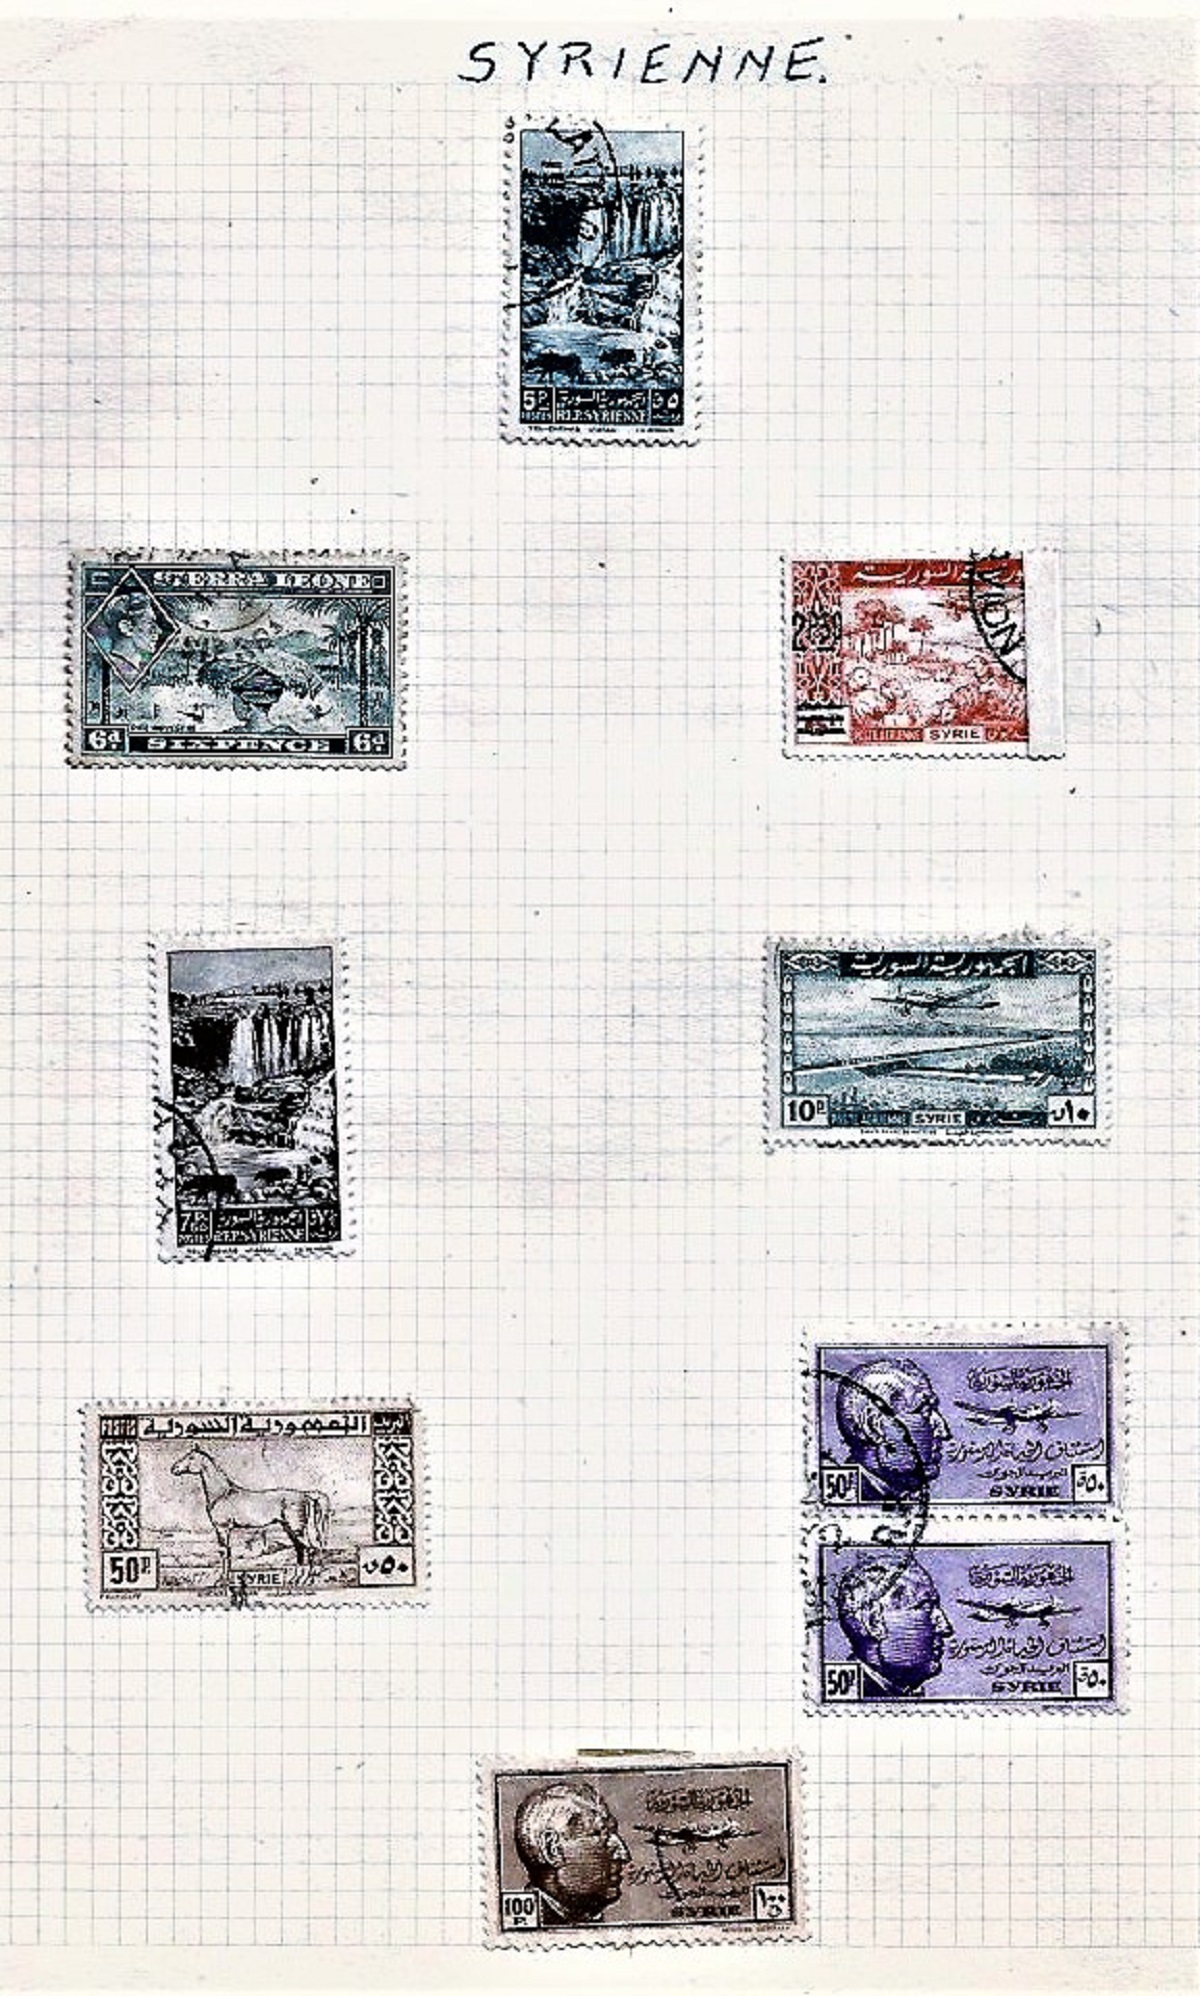 World stamp collection on 7 loose album pages. Includes Lebanon, Syria and more. Good condition. - Image 3 of 3